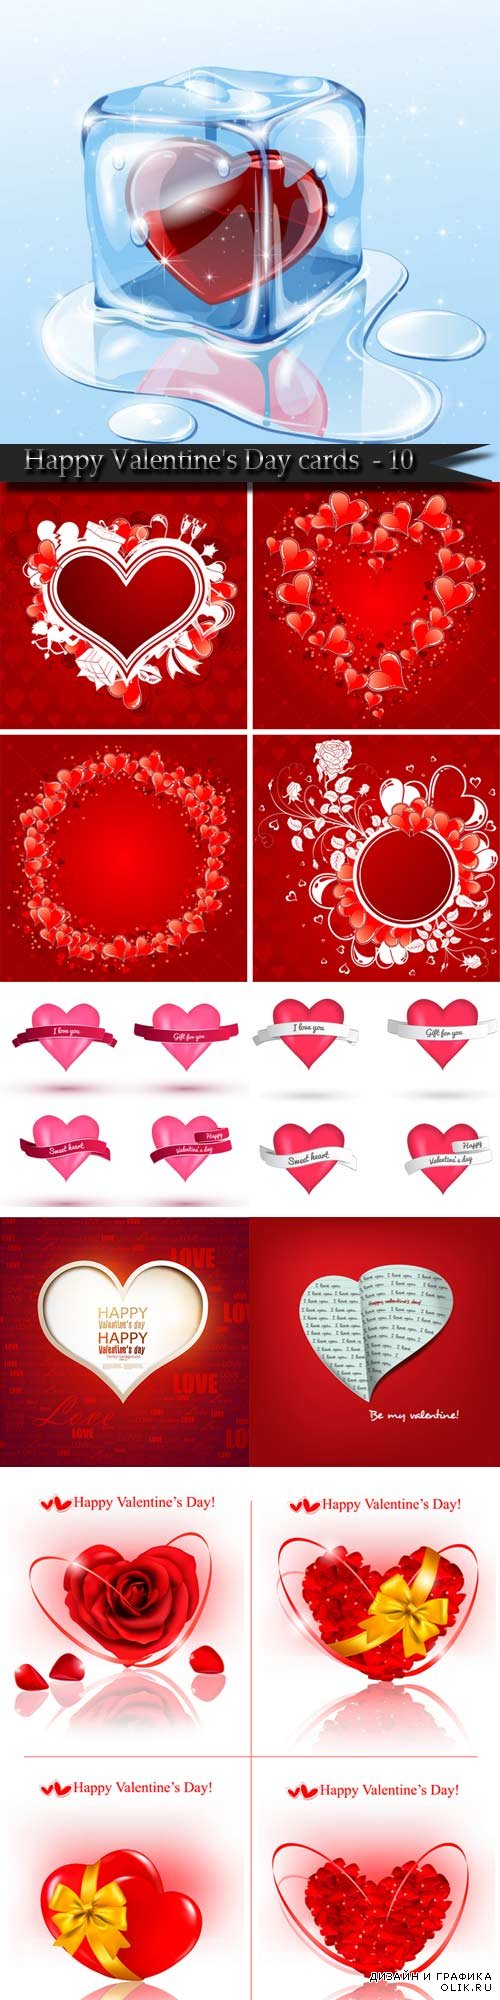 Happy Valentine's Day cards and backgrounds - 10